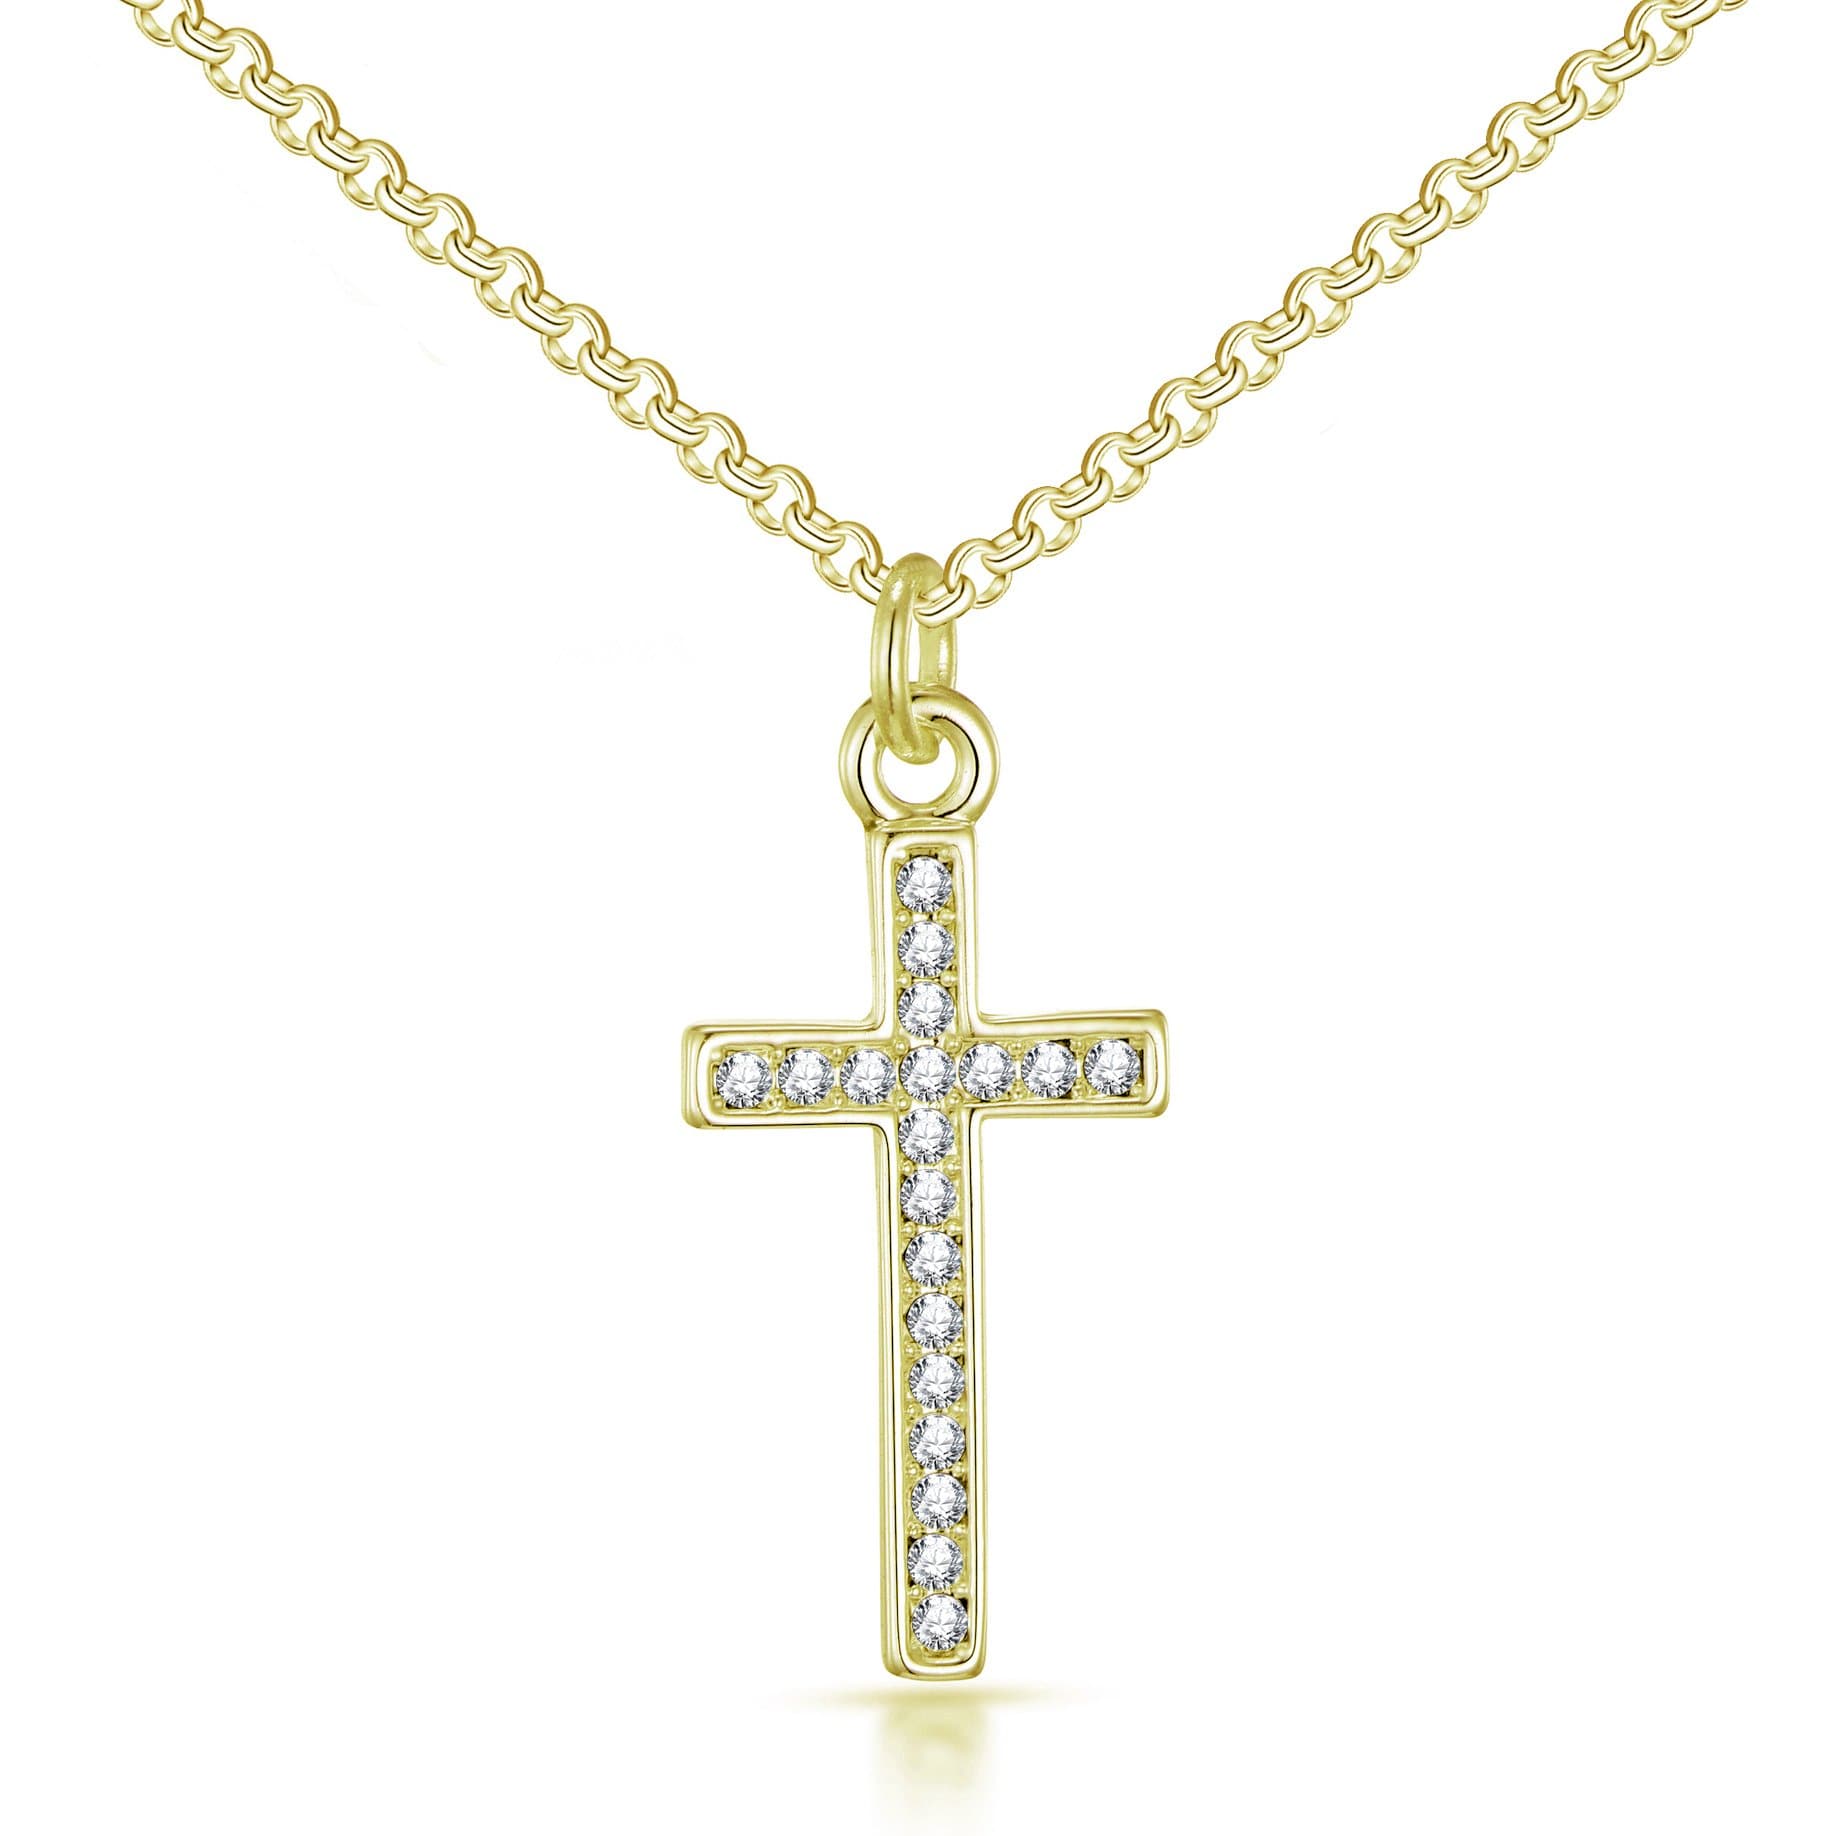 Gold Plated Pave Crystal Cross Necklace Created with Zircondia® Crystals by Philip Jones Jewellery